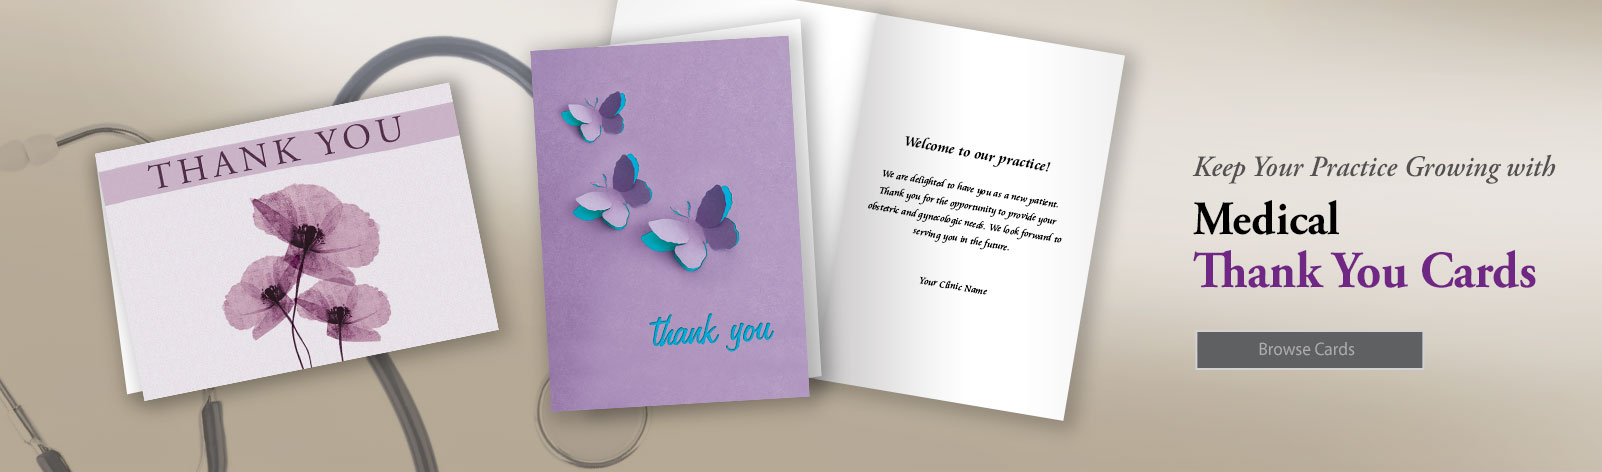 Medical Thank You Cards